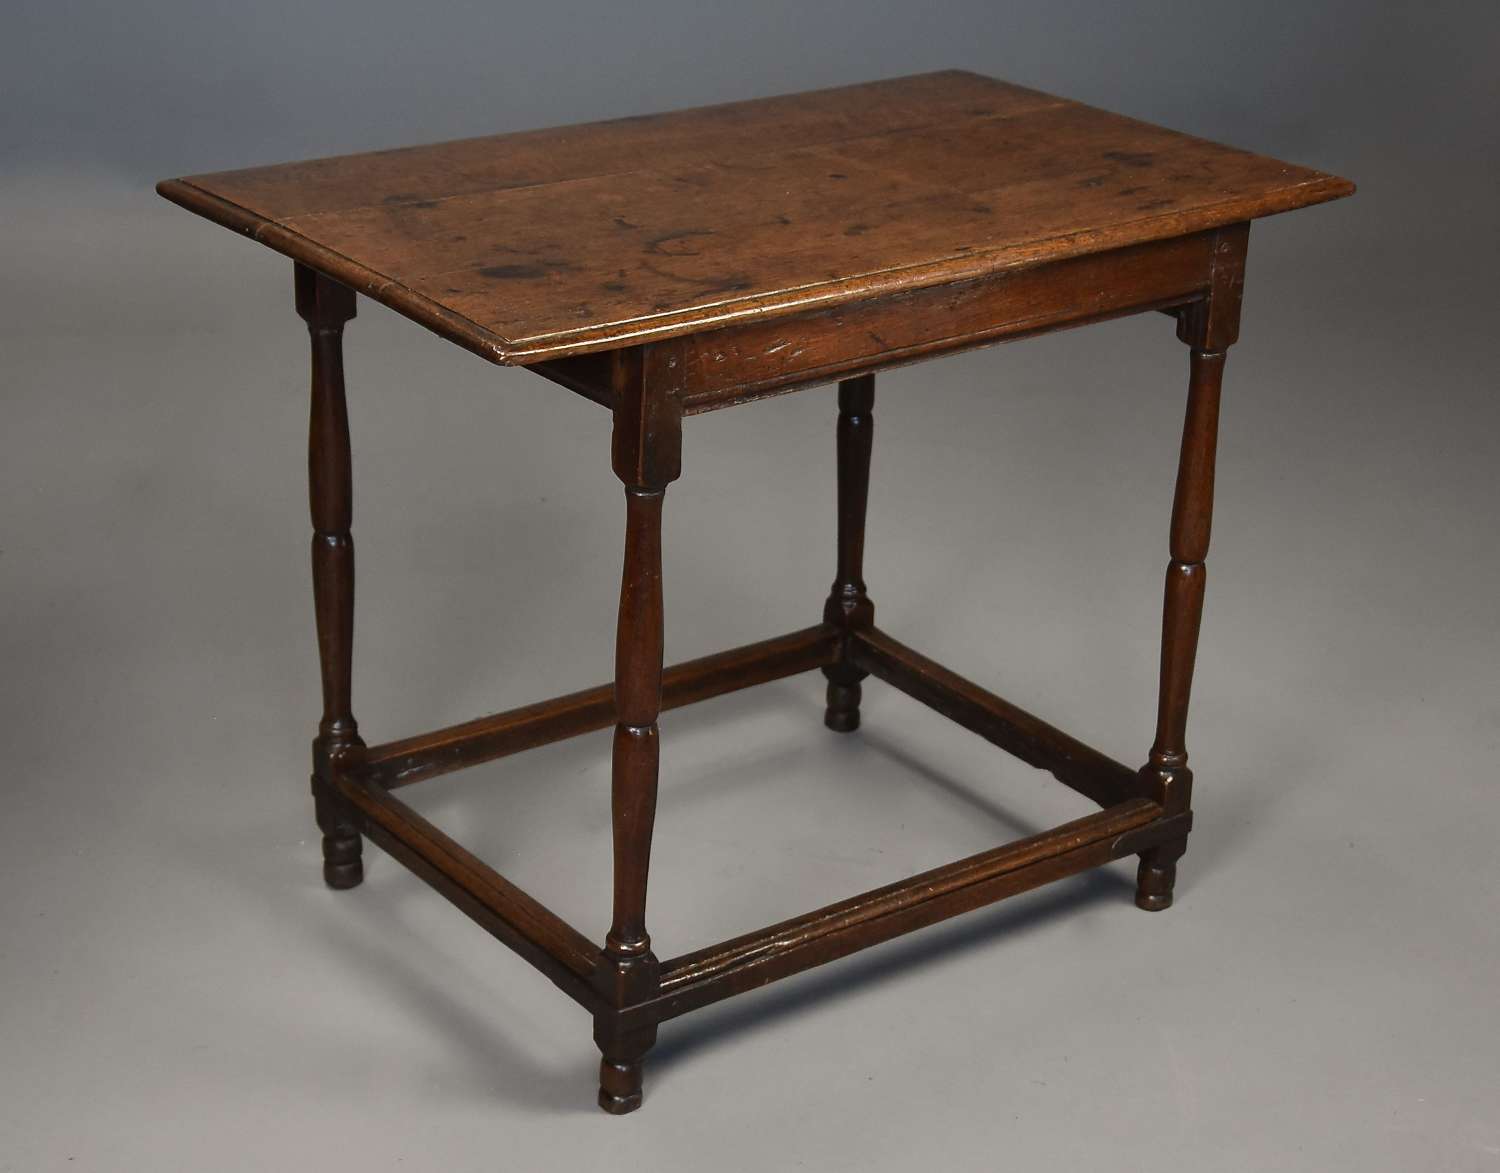 An unusual early 18th century oak tavern table of fine patina